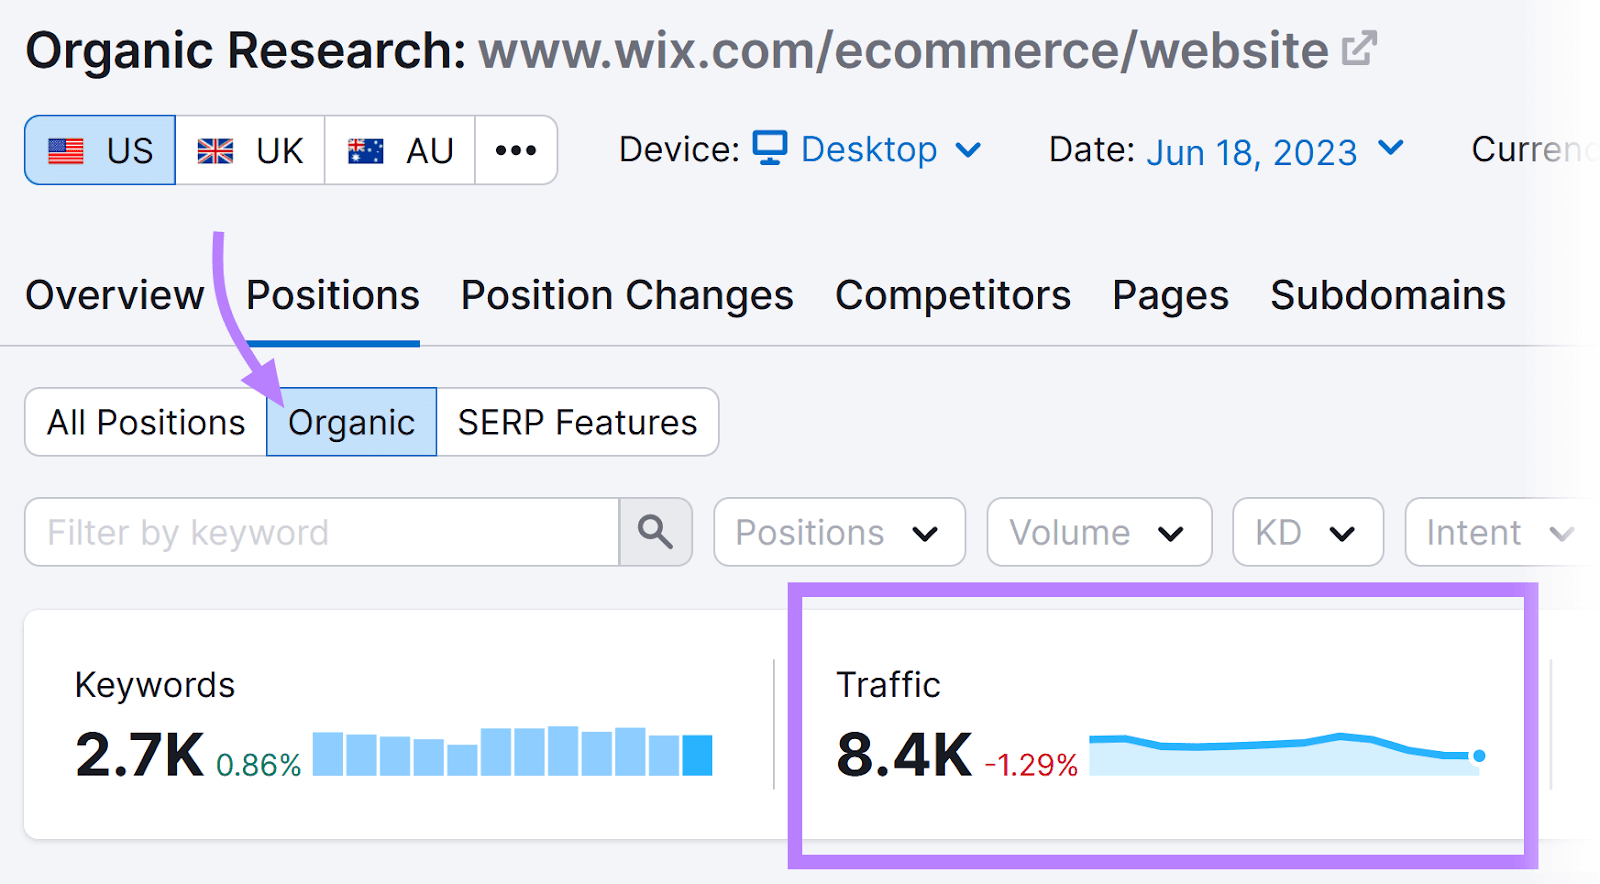 Organic Research tool s،ws 8.4K in traffic metric for Wix page